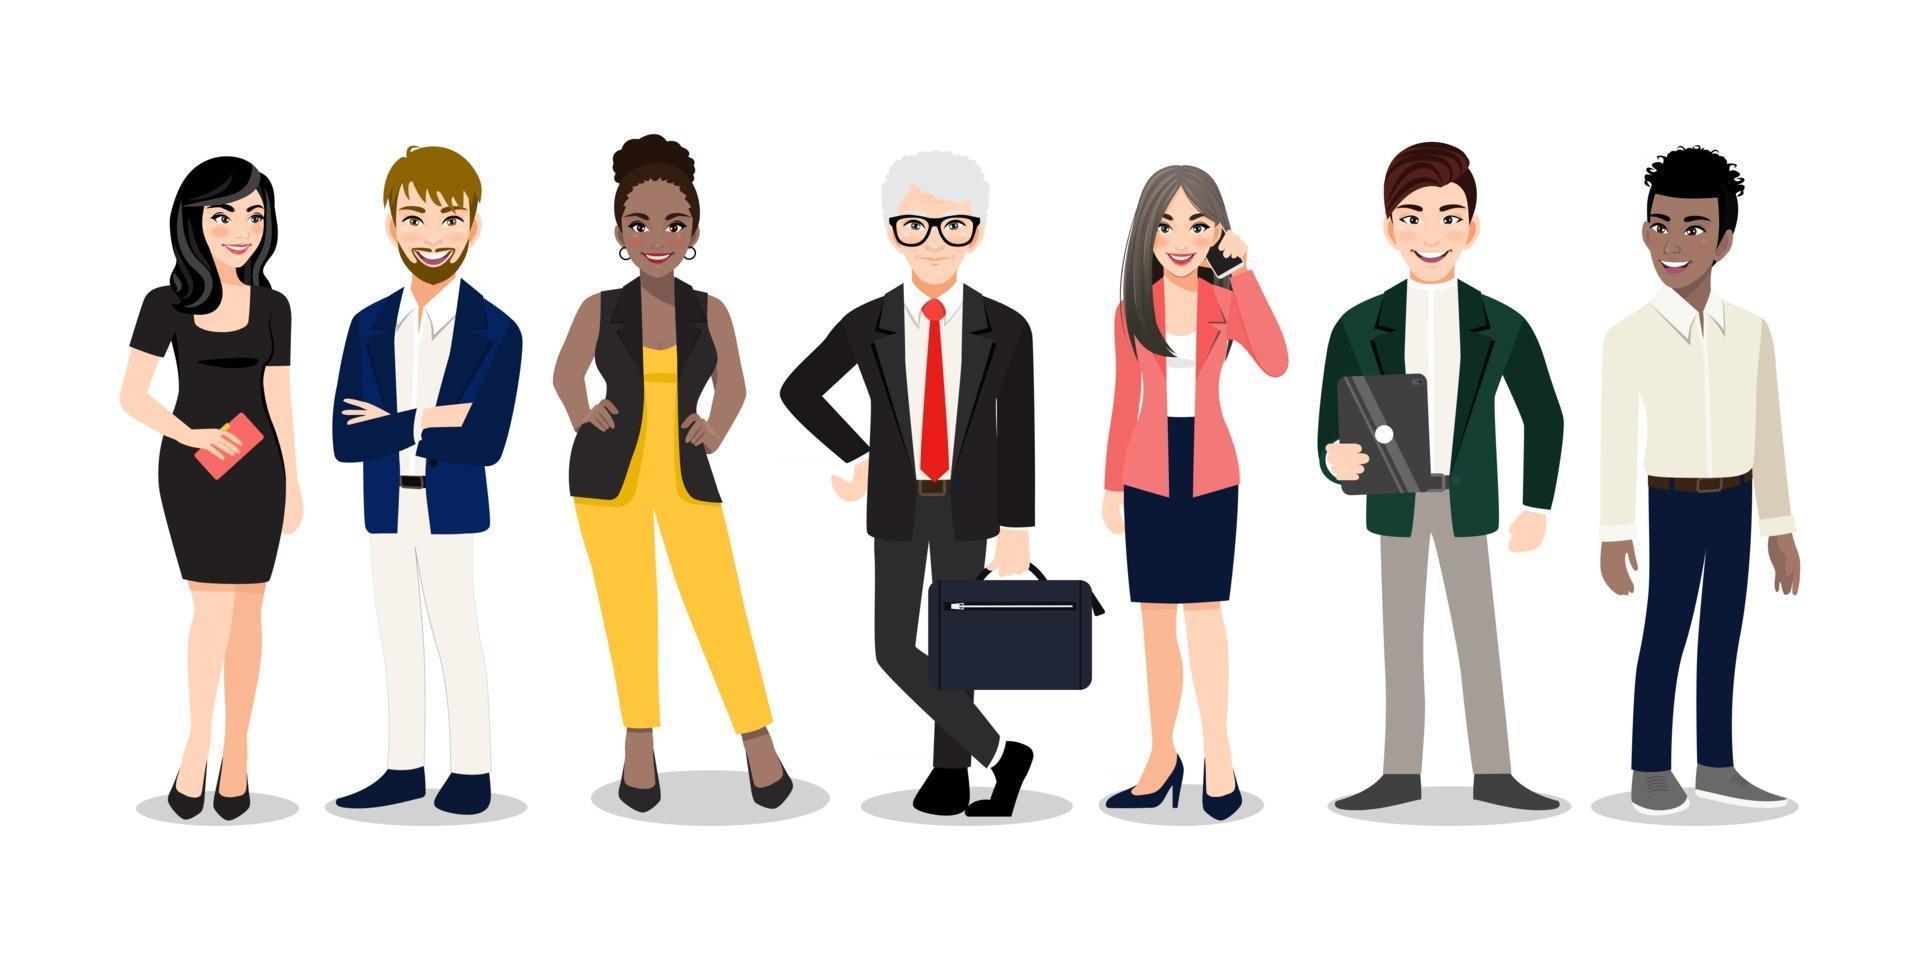 Office workers or business multinational team standing and smiling together. Vector illustration of diverse cartoon men and women of various races, ages and body type in office outfits.